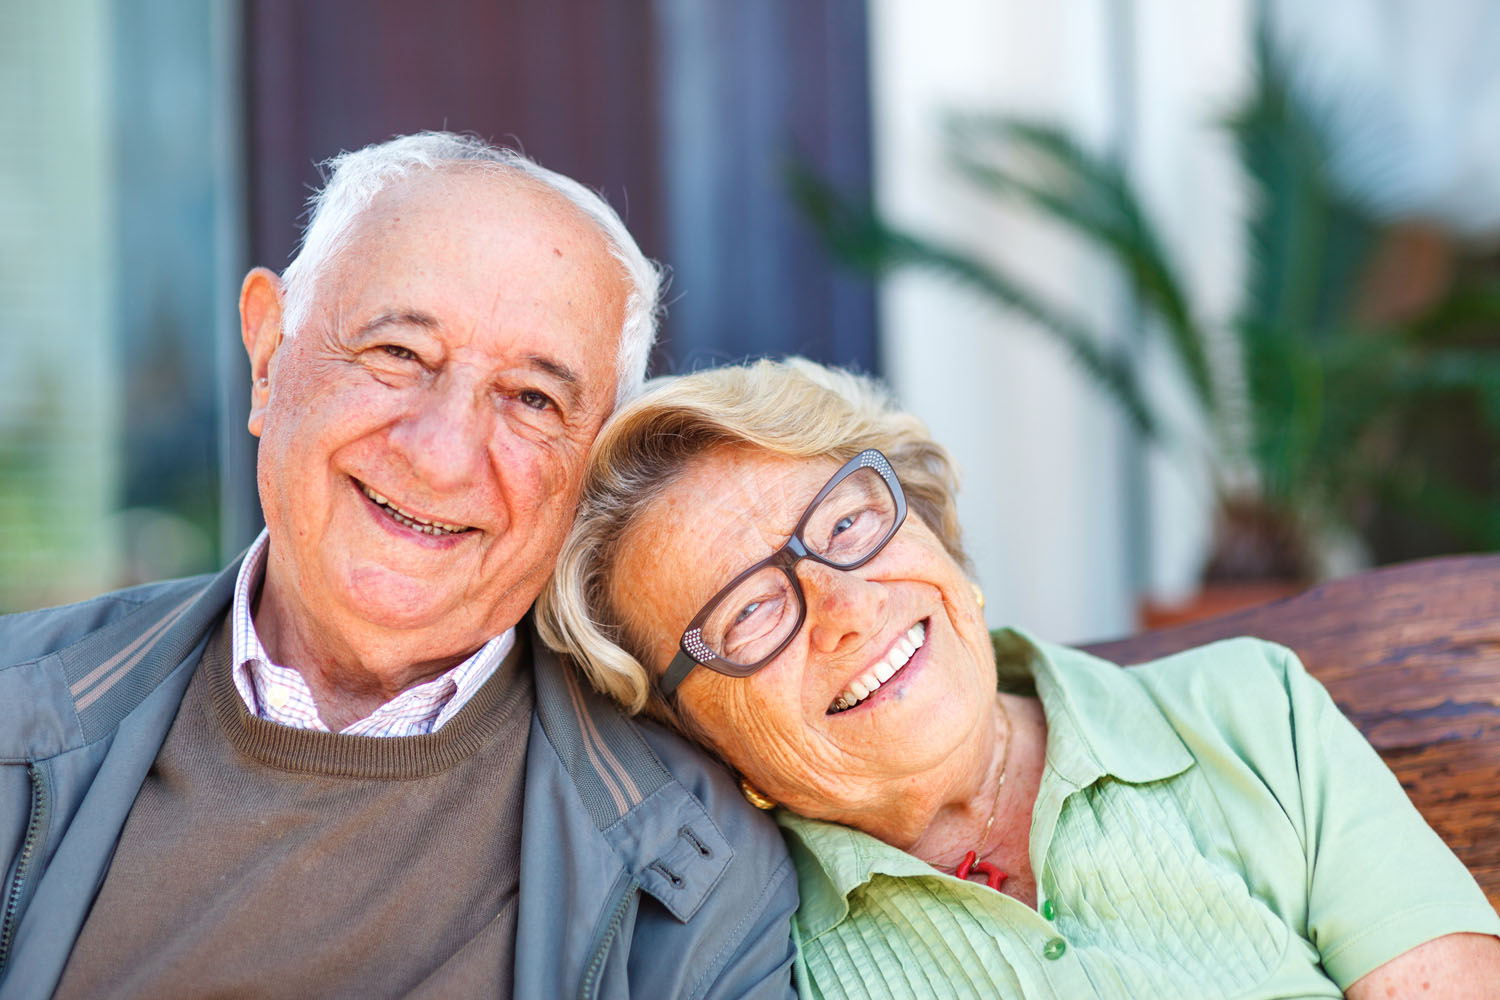 With good planning, this mature couple enjoys a comfortable retirement.